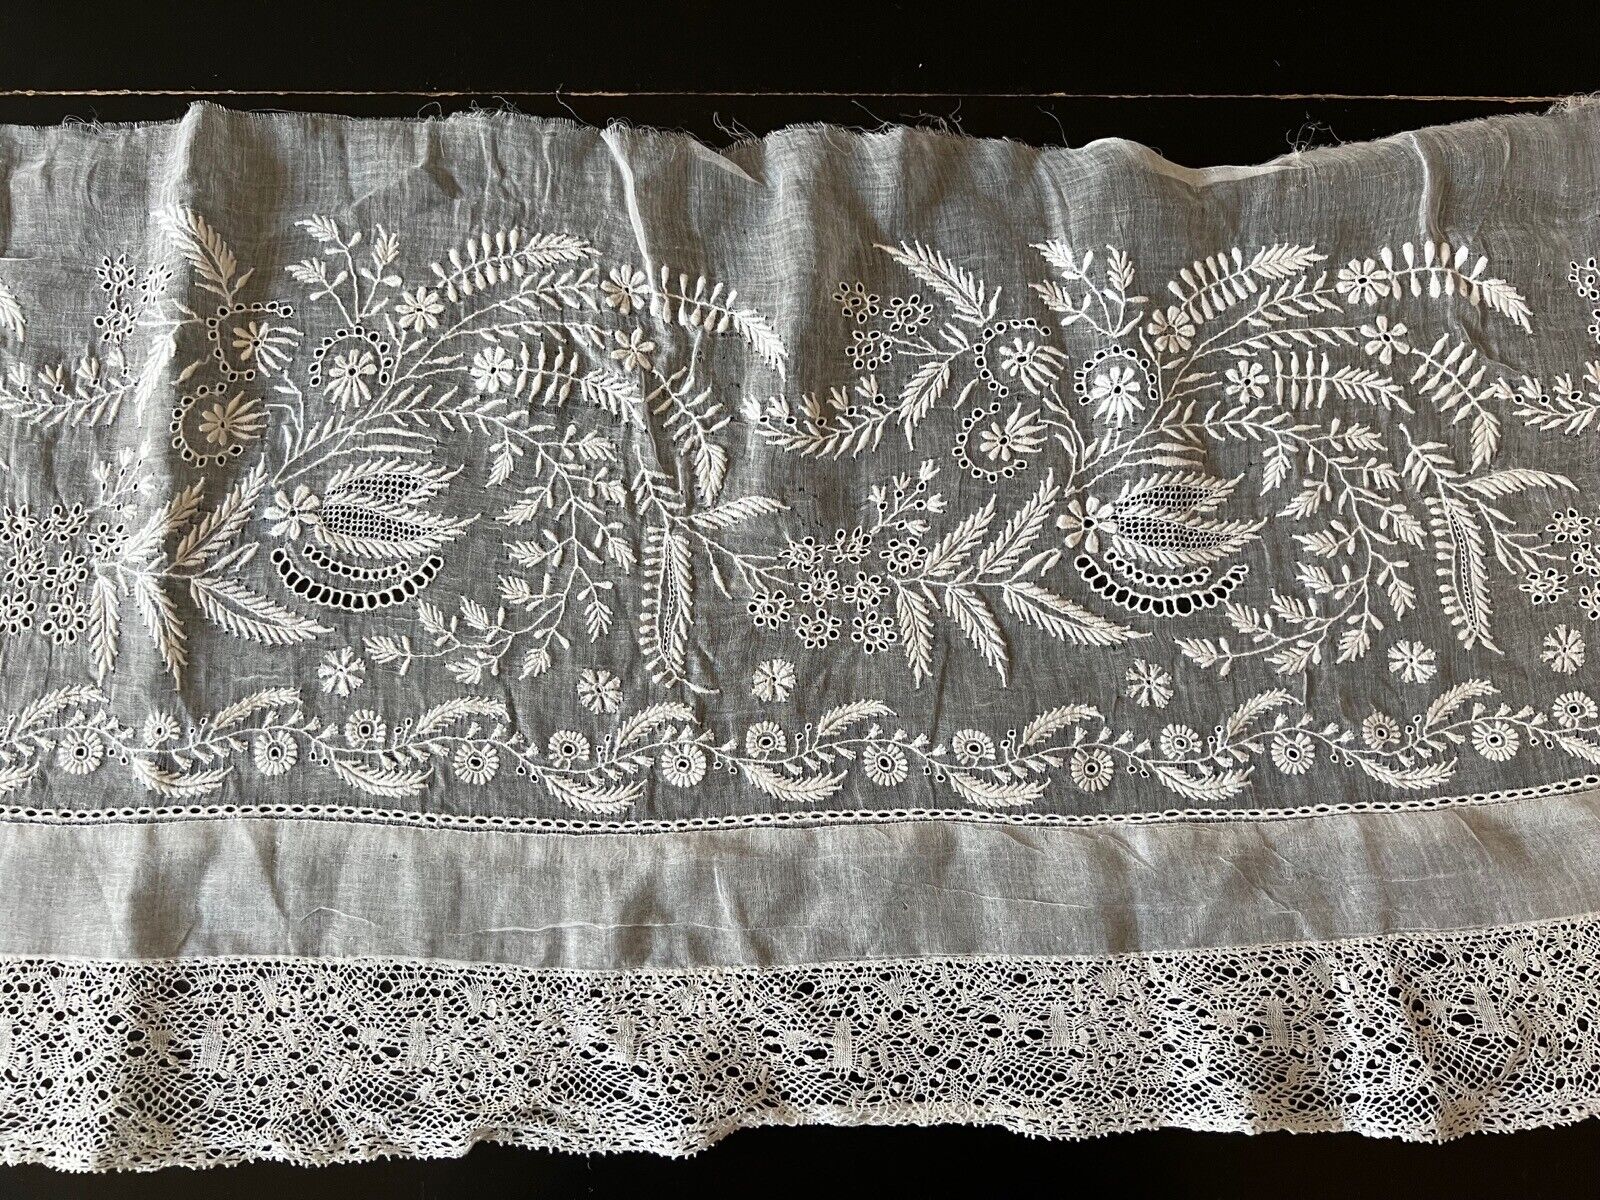 ANTIQUE LACE - CIRCA  EARLY 1800’s, WHITEWORK EMBROIDERY AND BINCHE LACE